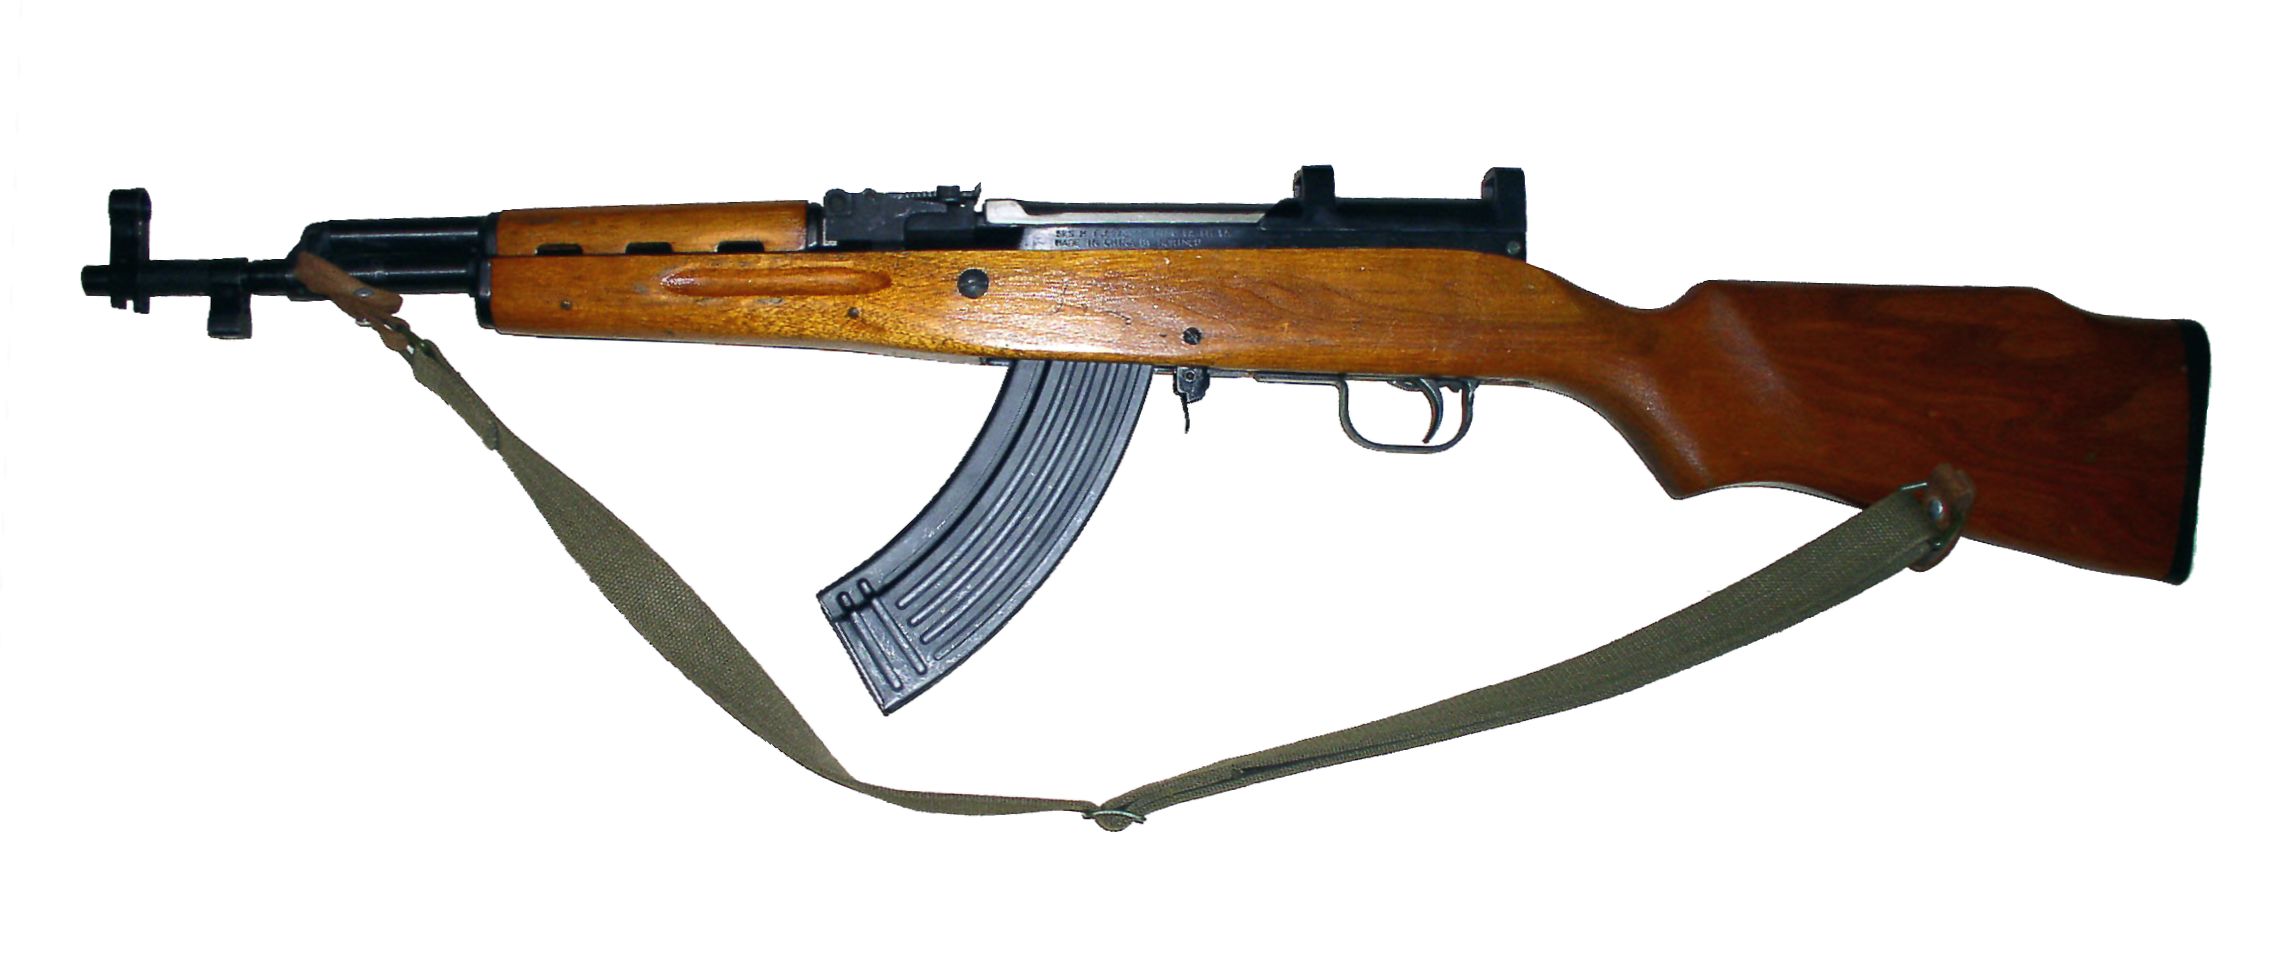 weapons, sks rifle